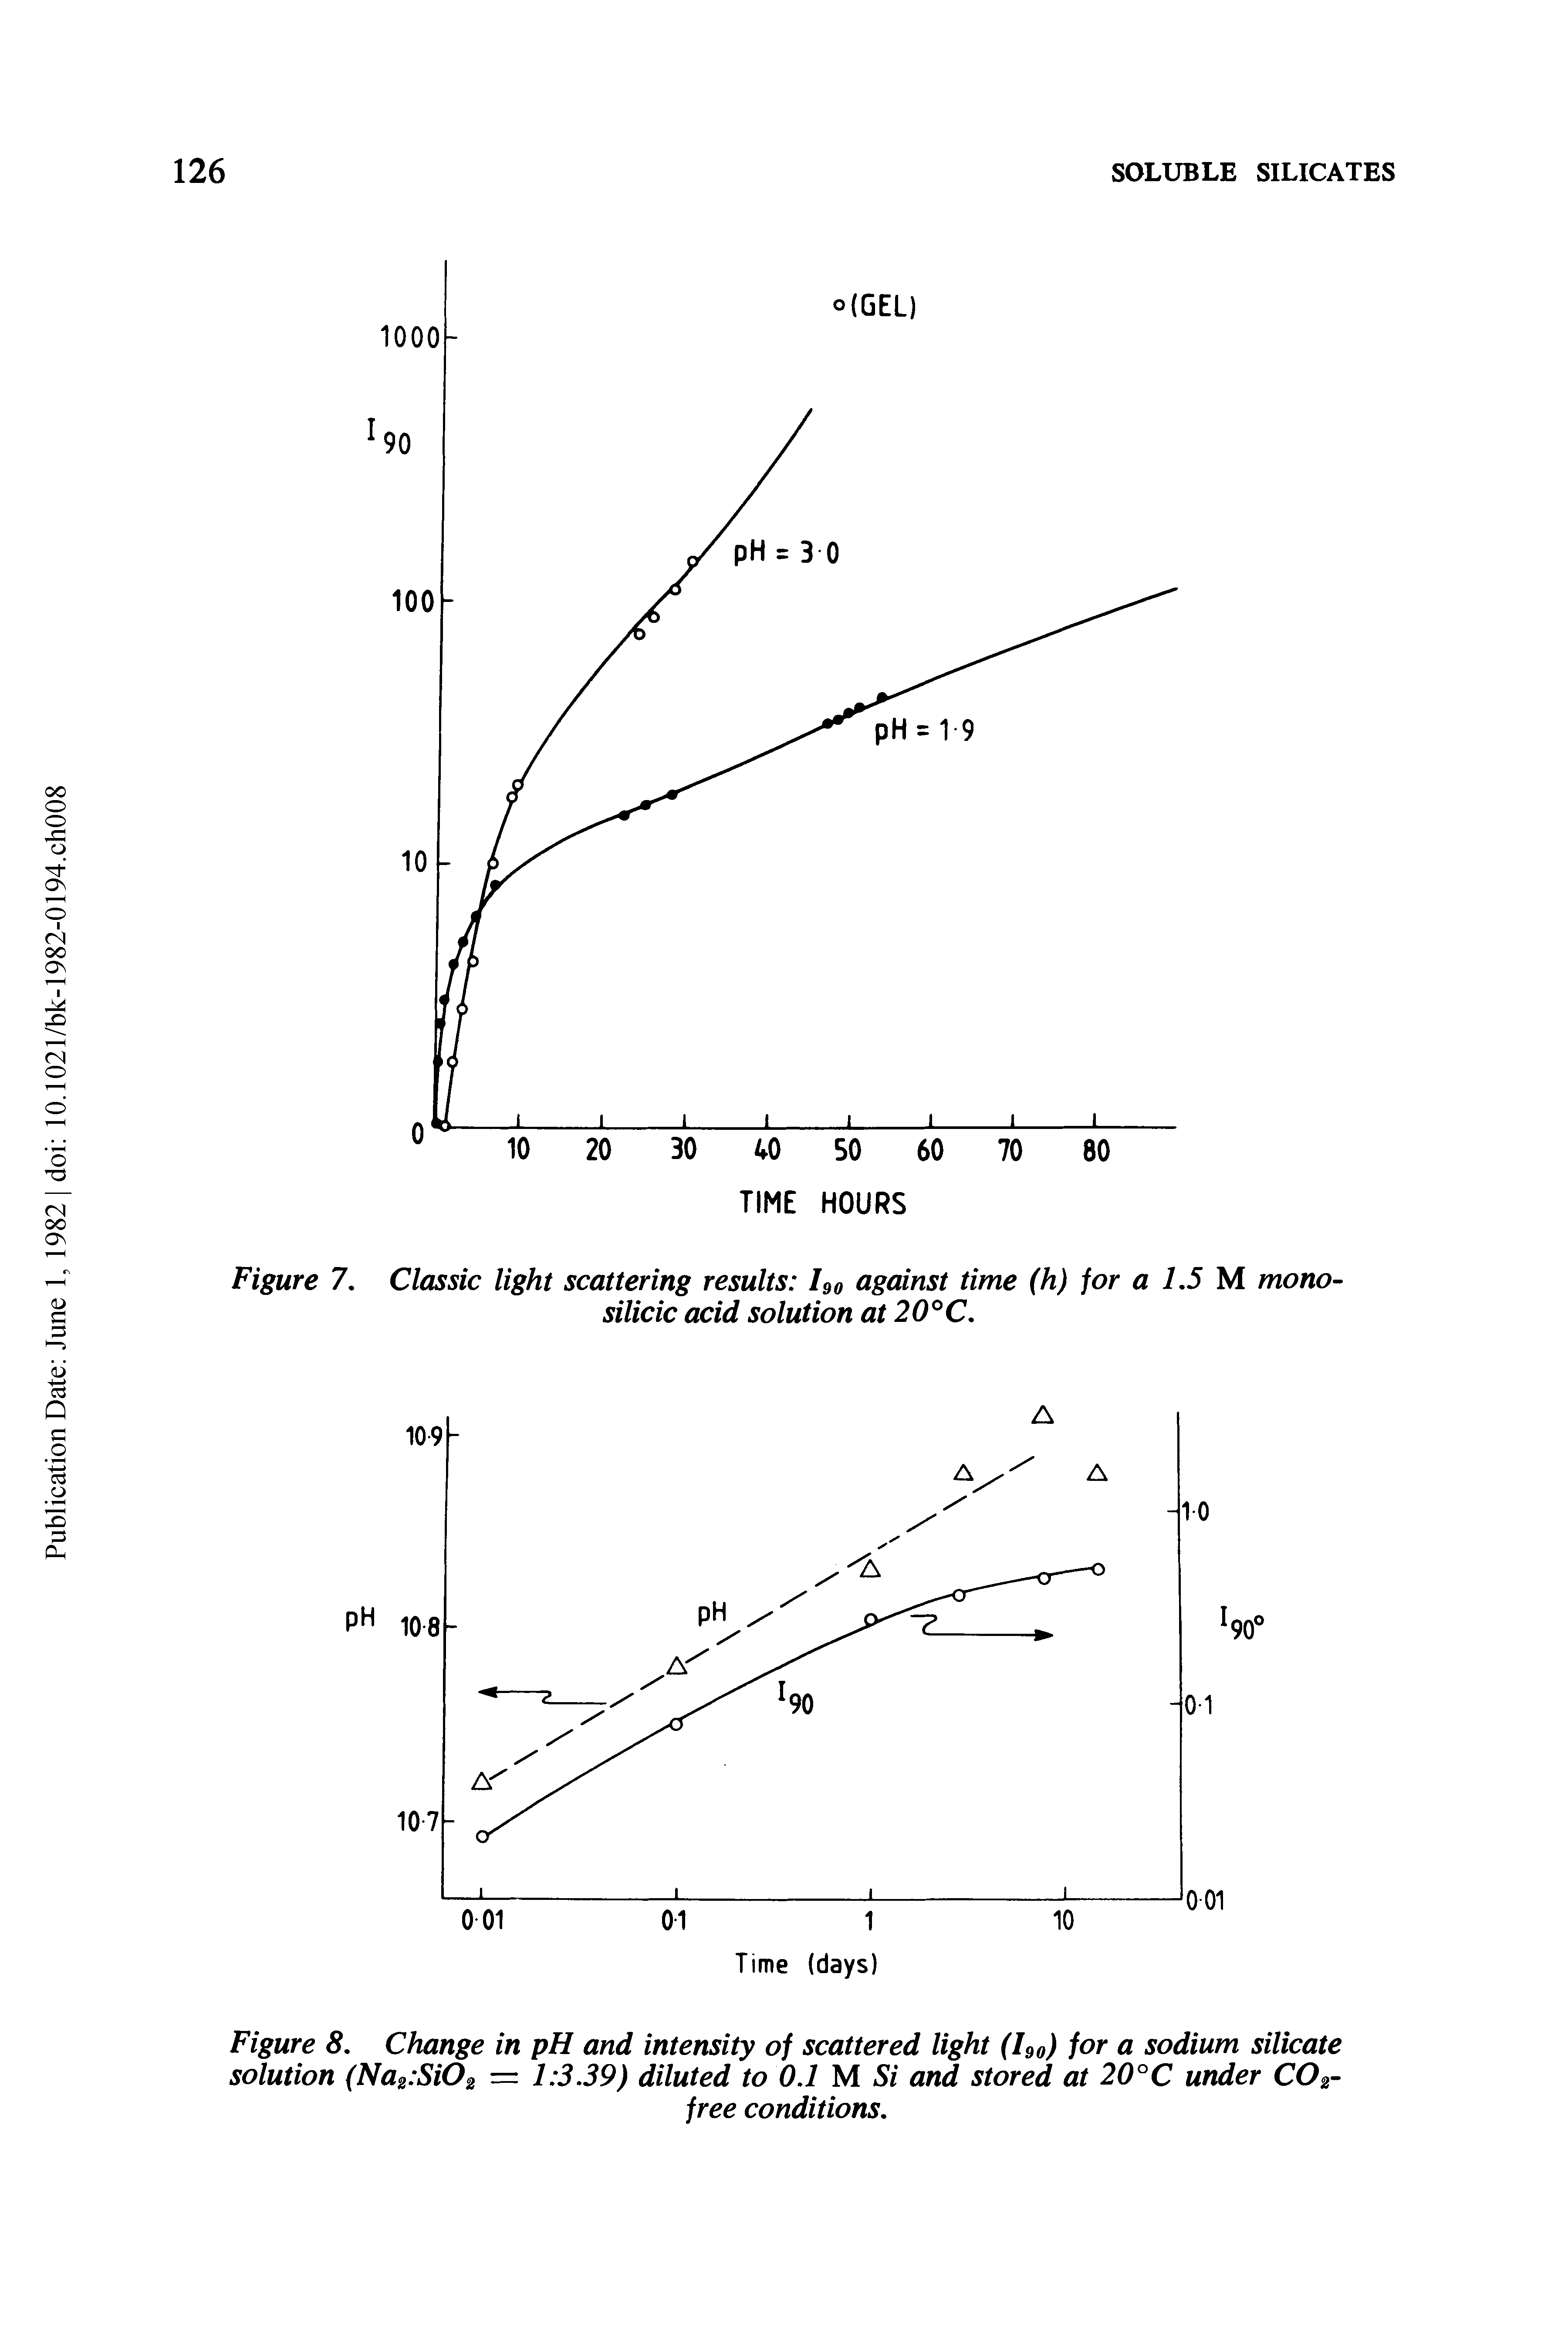 Figure 7. Classic light scattering results ho against time (h) for a 1,5 M mono-silicic acid solution at 2O C,...